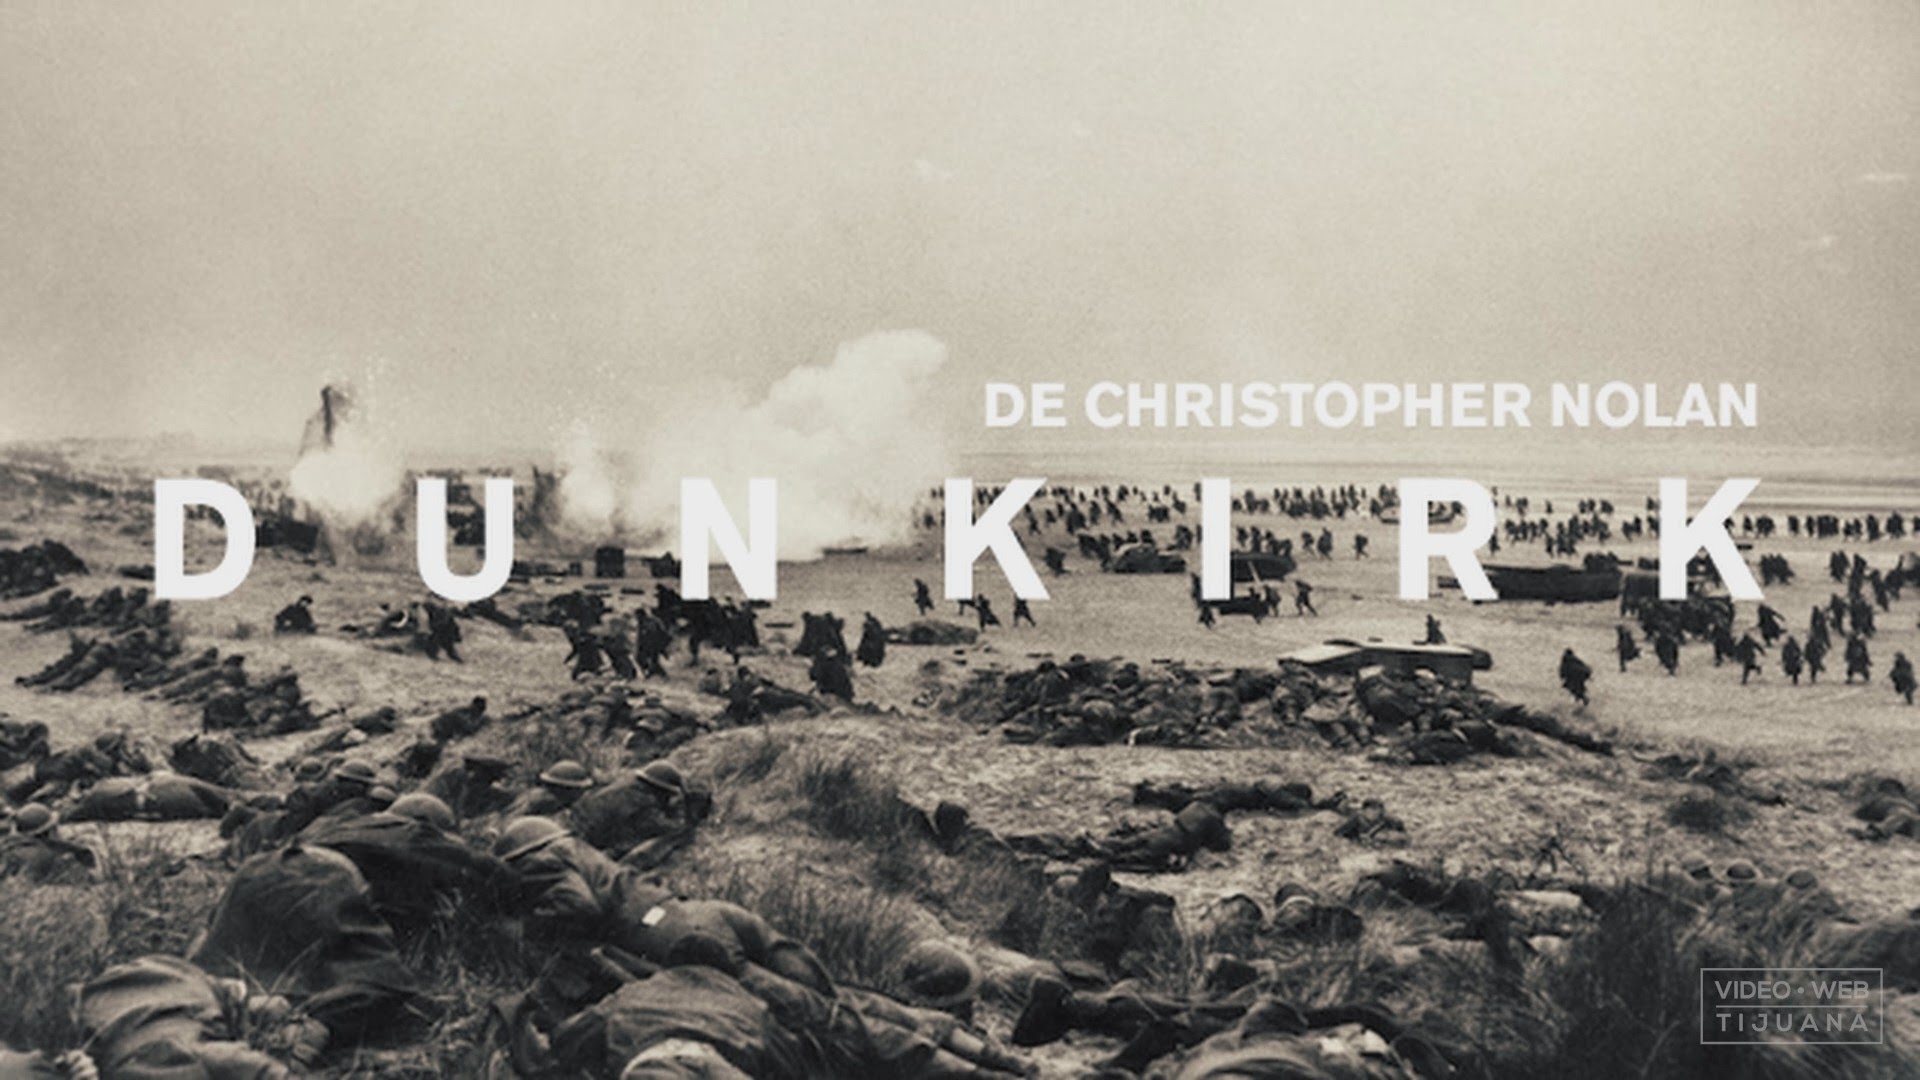 great hd dunkirk image